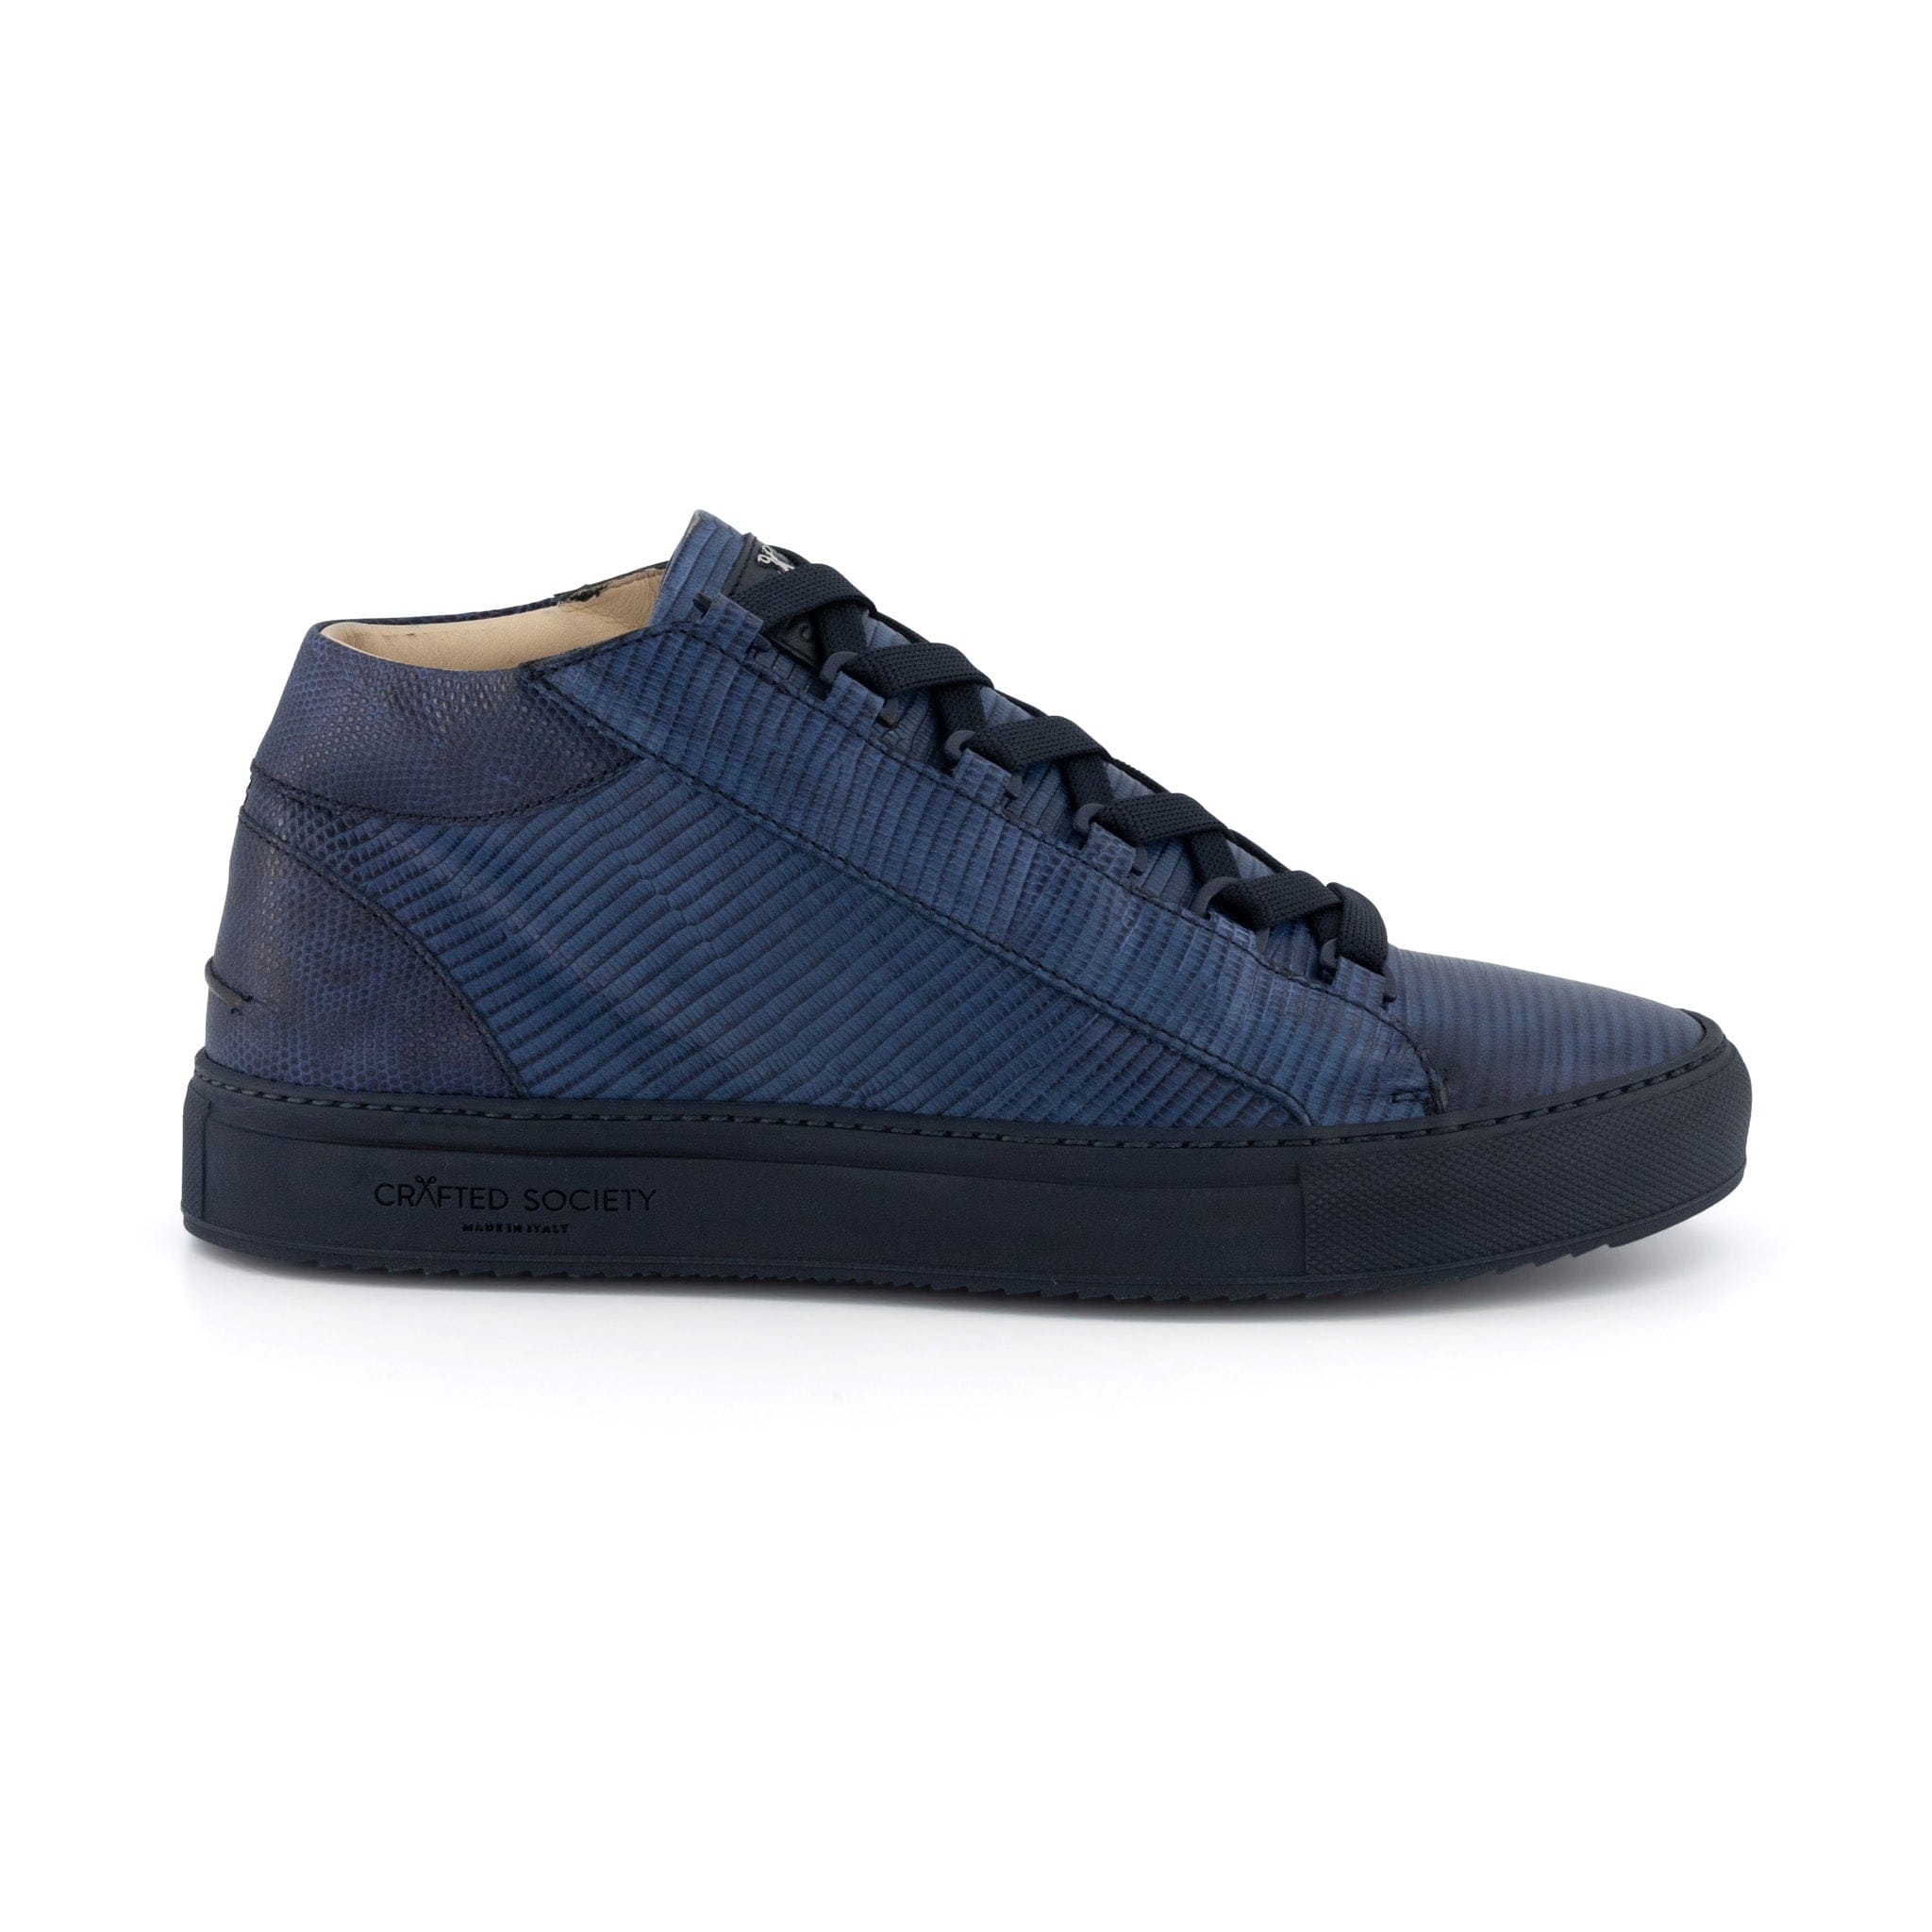 Rico Mid LTD EDN | Navy full grain Leather | Navy Outsole | Made in Italy | Size 41